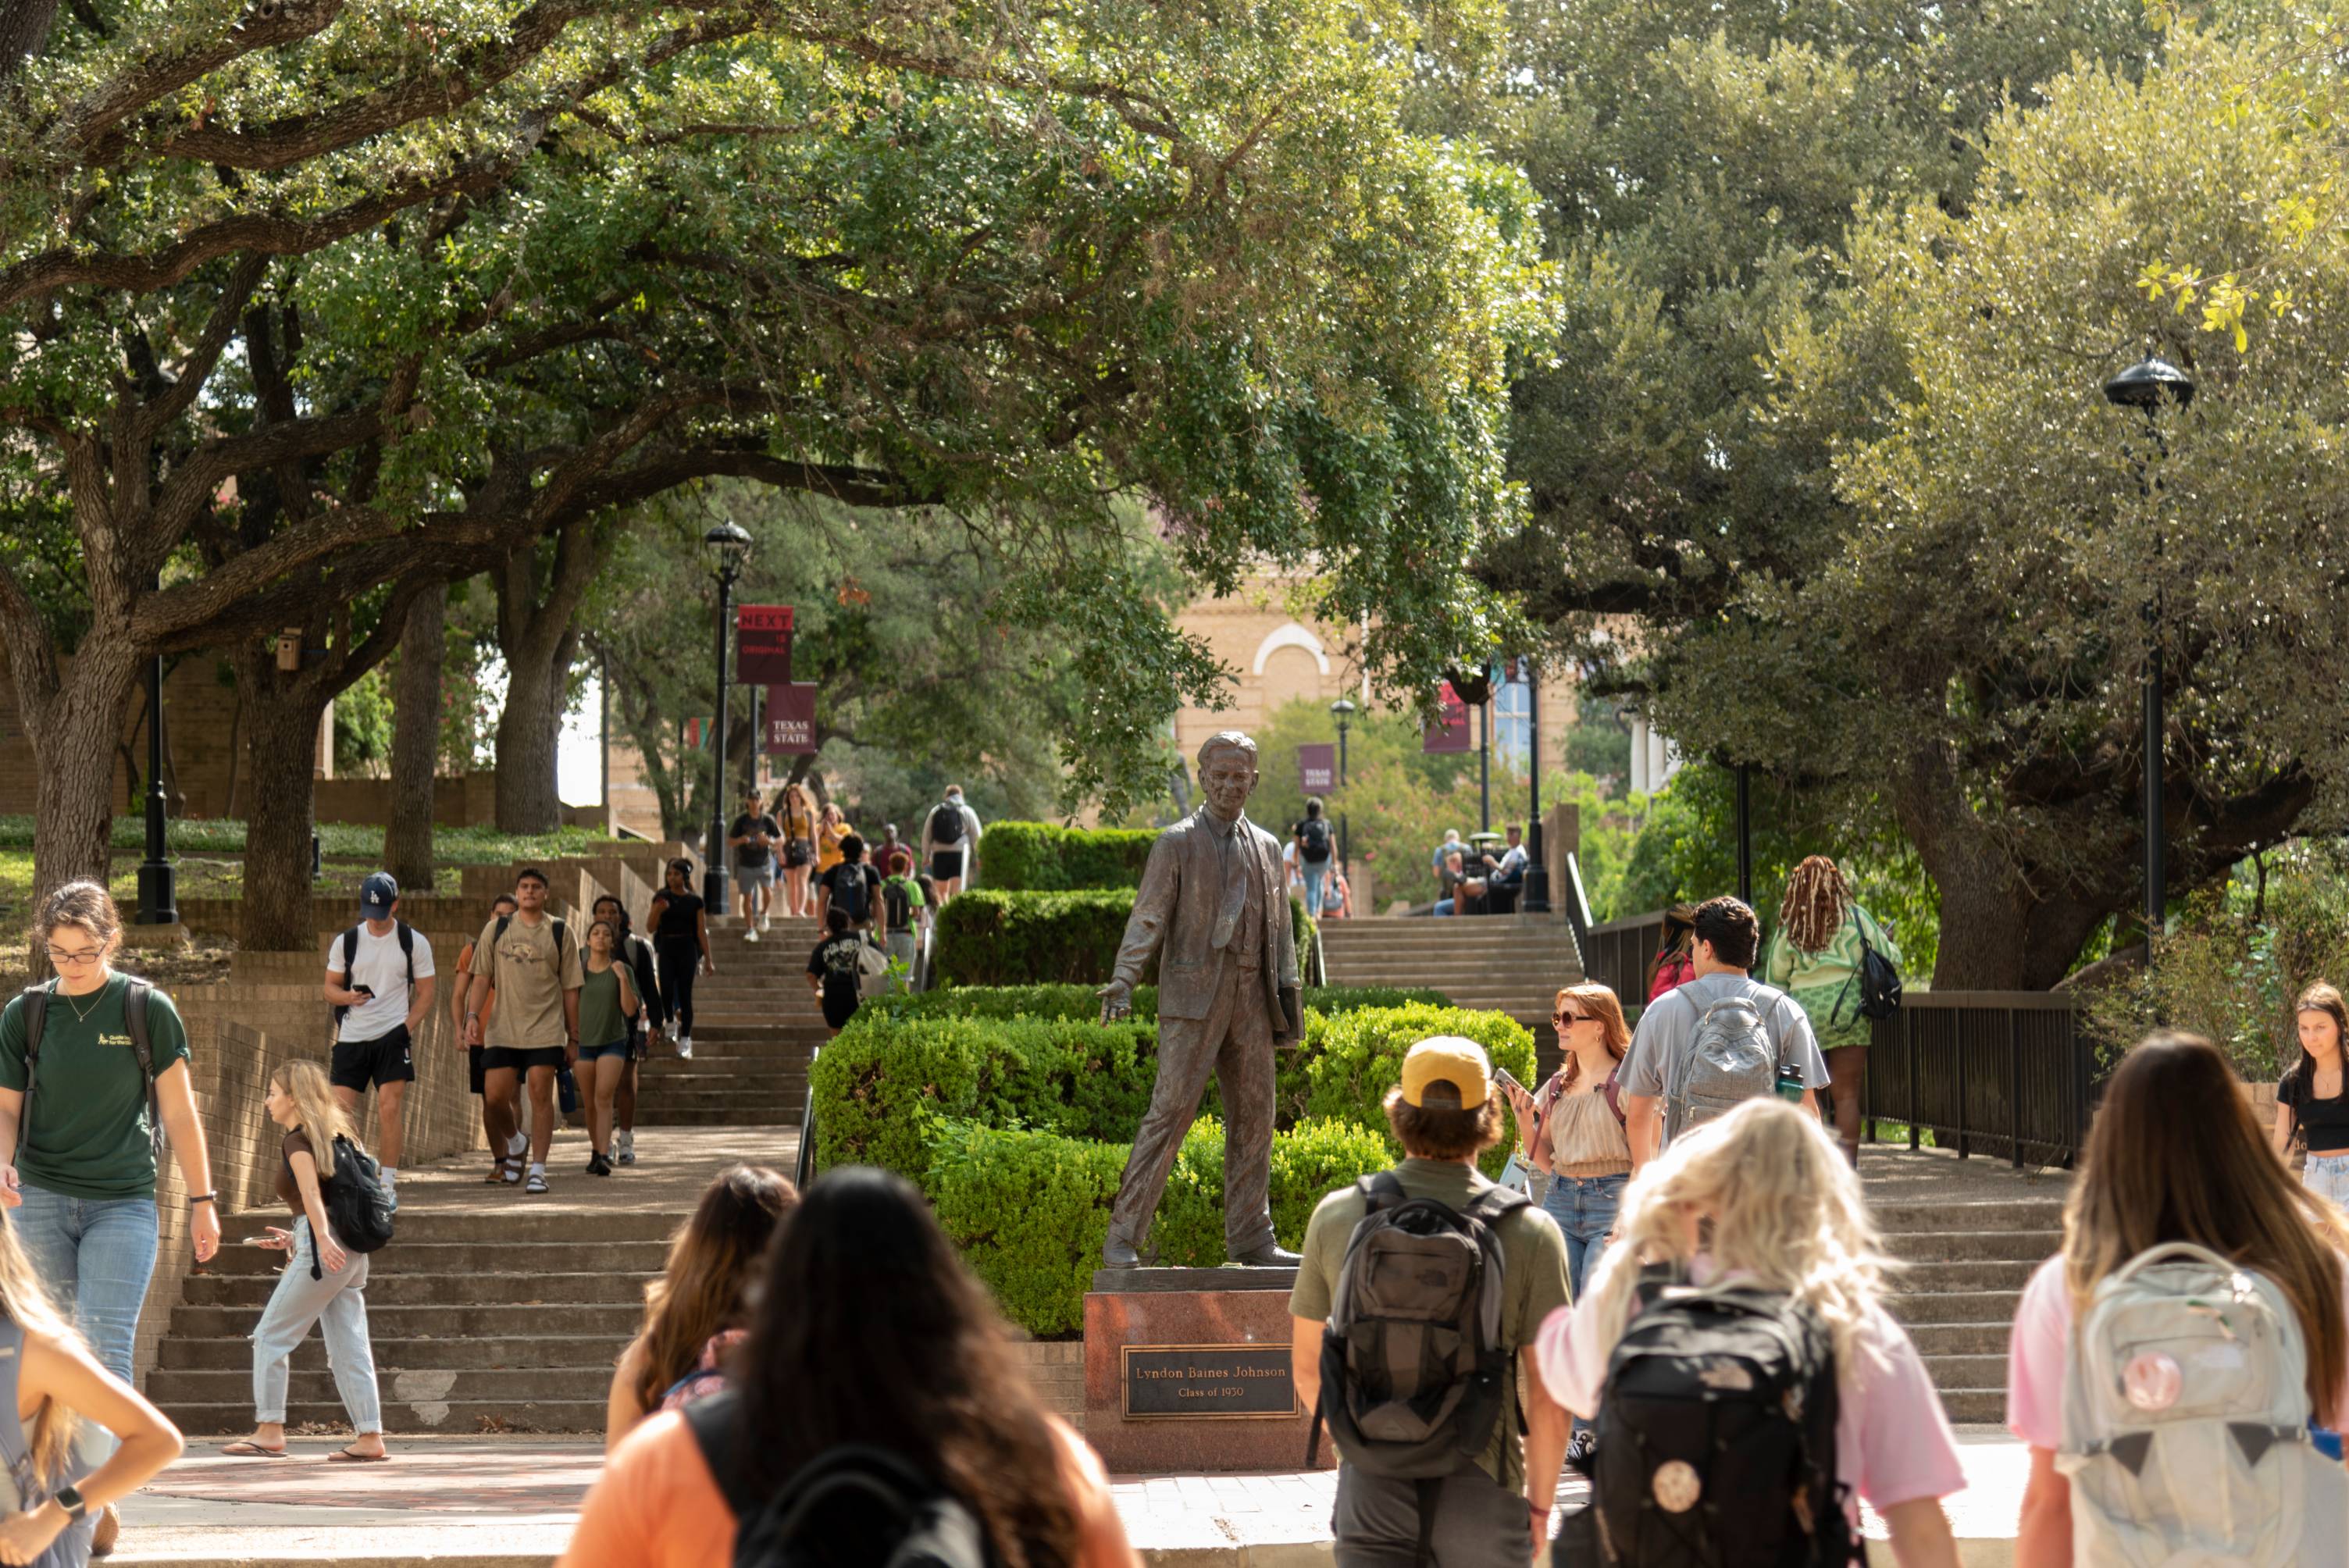 Students walking in the Quad past the statue of LBJ